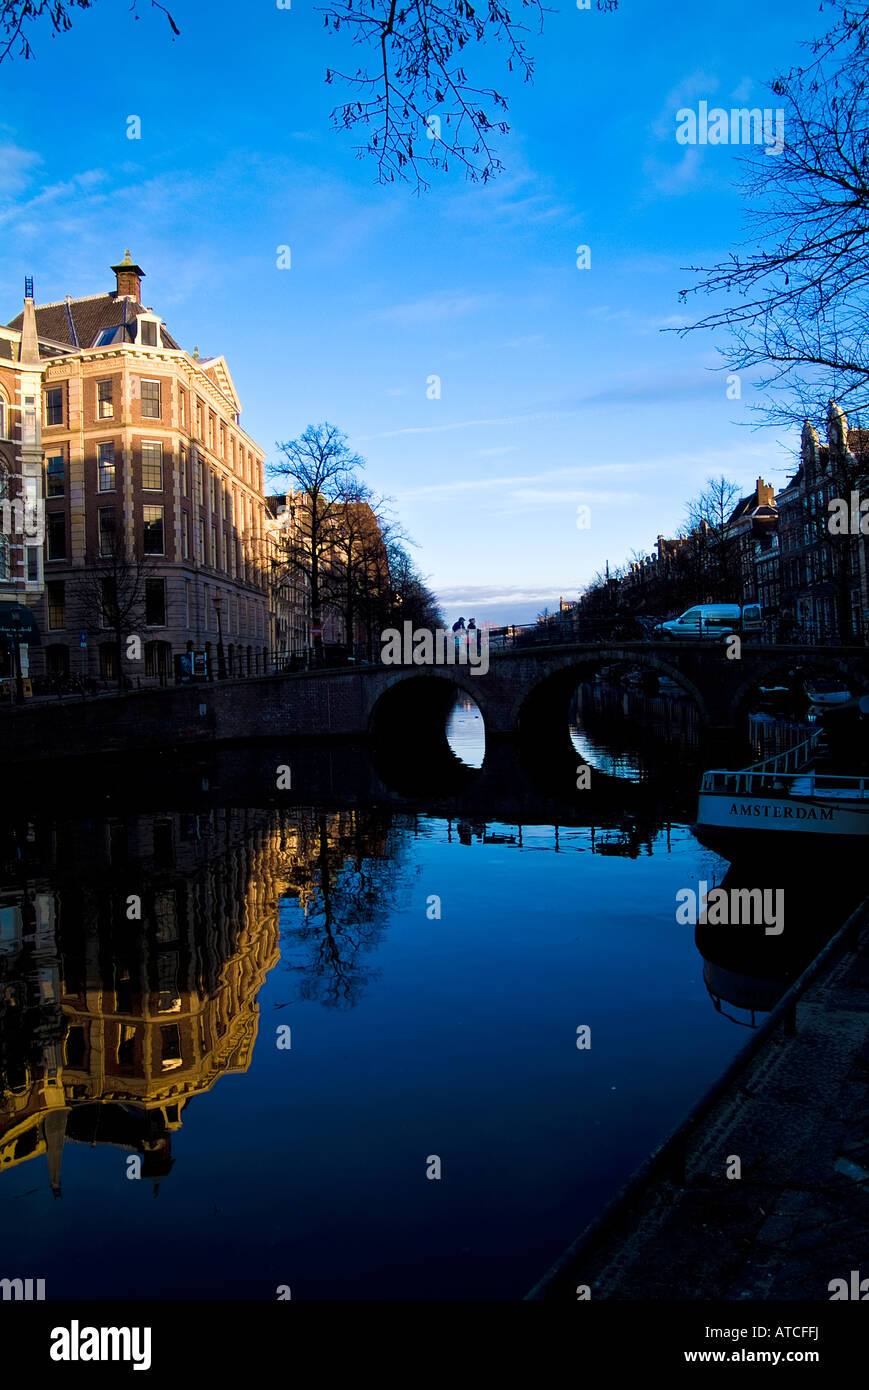 Amsterdam canal 4 Foto Stock